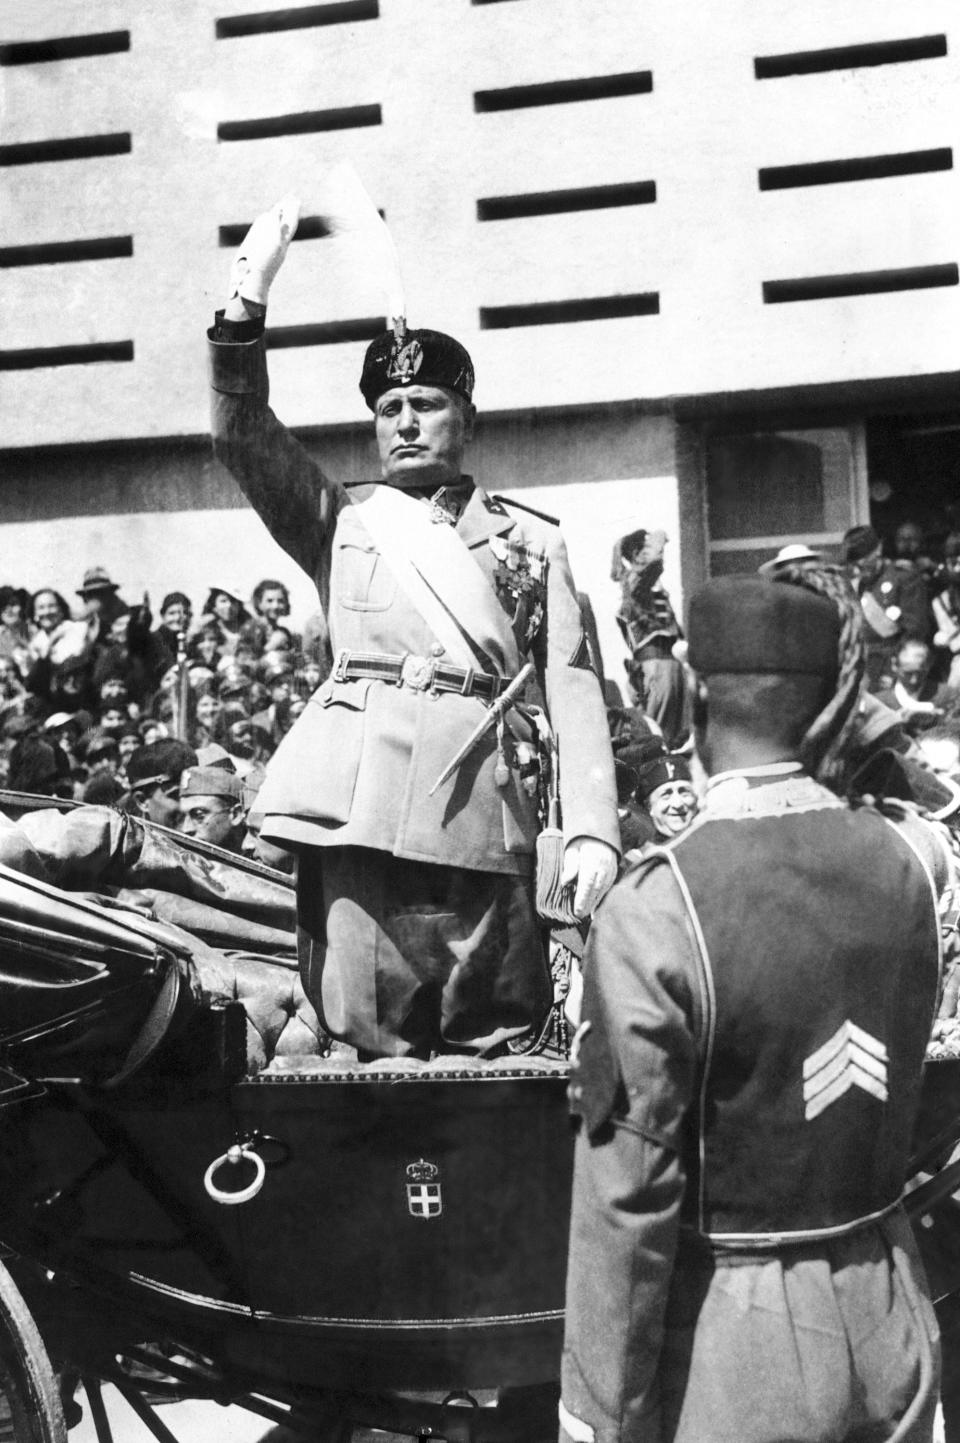 FILE - Italian dictator Benito Mussolini gives the Fascist salute before making his speech at the open ceremony of the Tripoli fair, in Tripoli, Libya, March 17, 1937. Italy, a long time victim of antiquities theft that has worked for decades to recover its treasures, is coming to terms with the fact that it, too has stolen loot in its museum collections: the relics of a brutal colonial empire that the country hasn't fully reckoned with. (AP Photo, File)